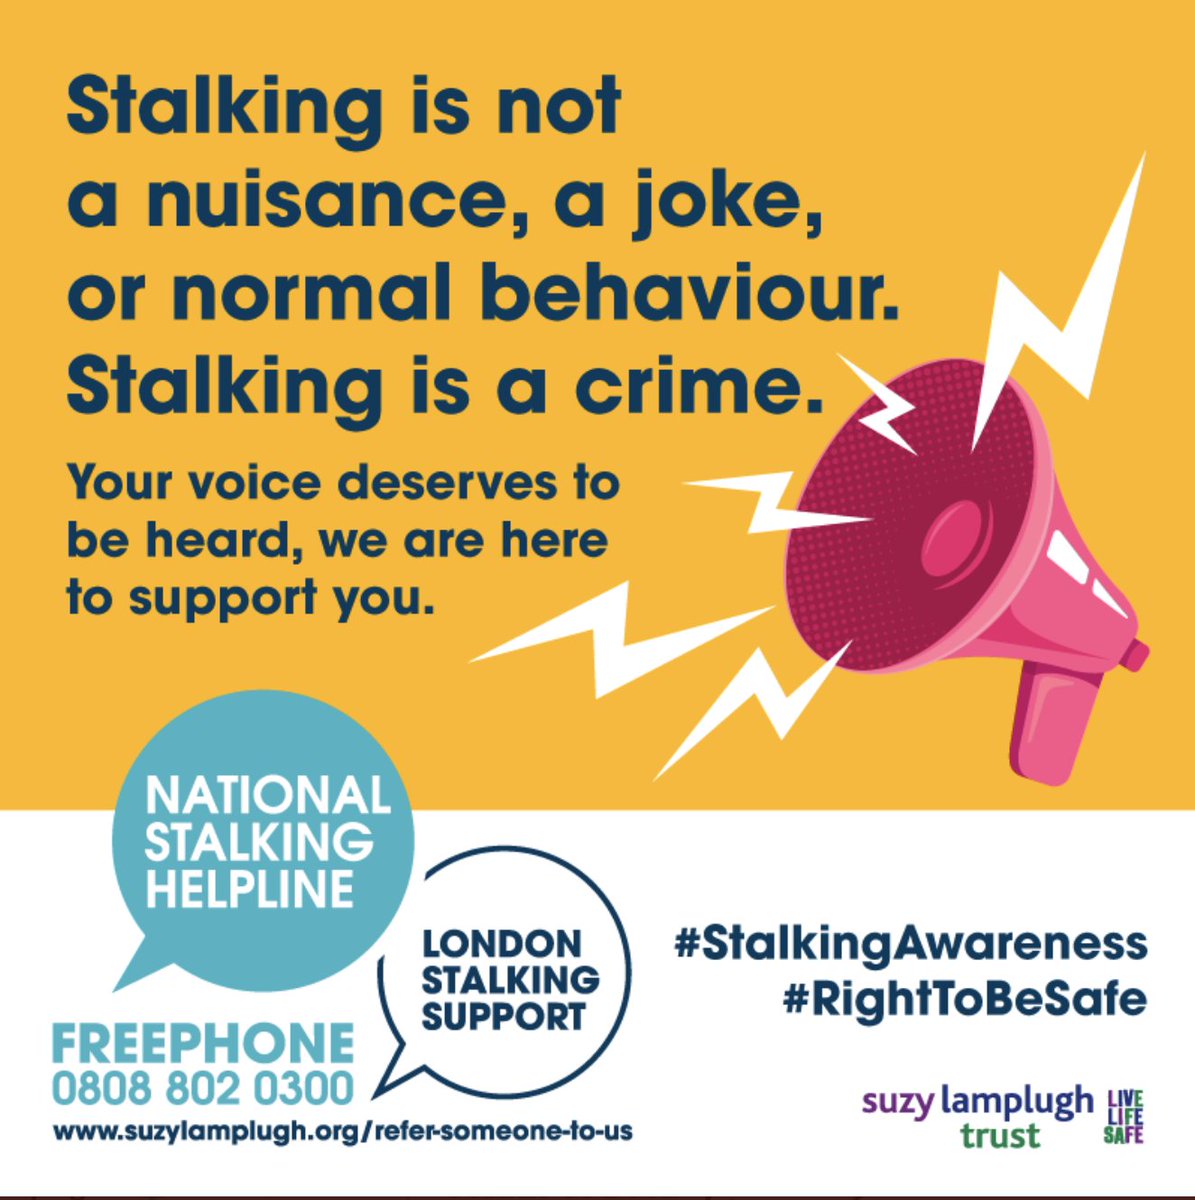 Our National Stalking Helpline has reopened today. If you, or someone you know, has been a victim of stalking, you can get in contact with @TalkingStalking at 0808 802 0300 or through our online tool suzylamplugh.org/am-i-being-sta…. #StandingAgainstStalking